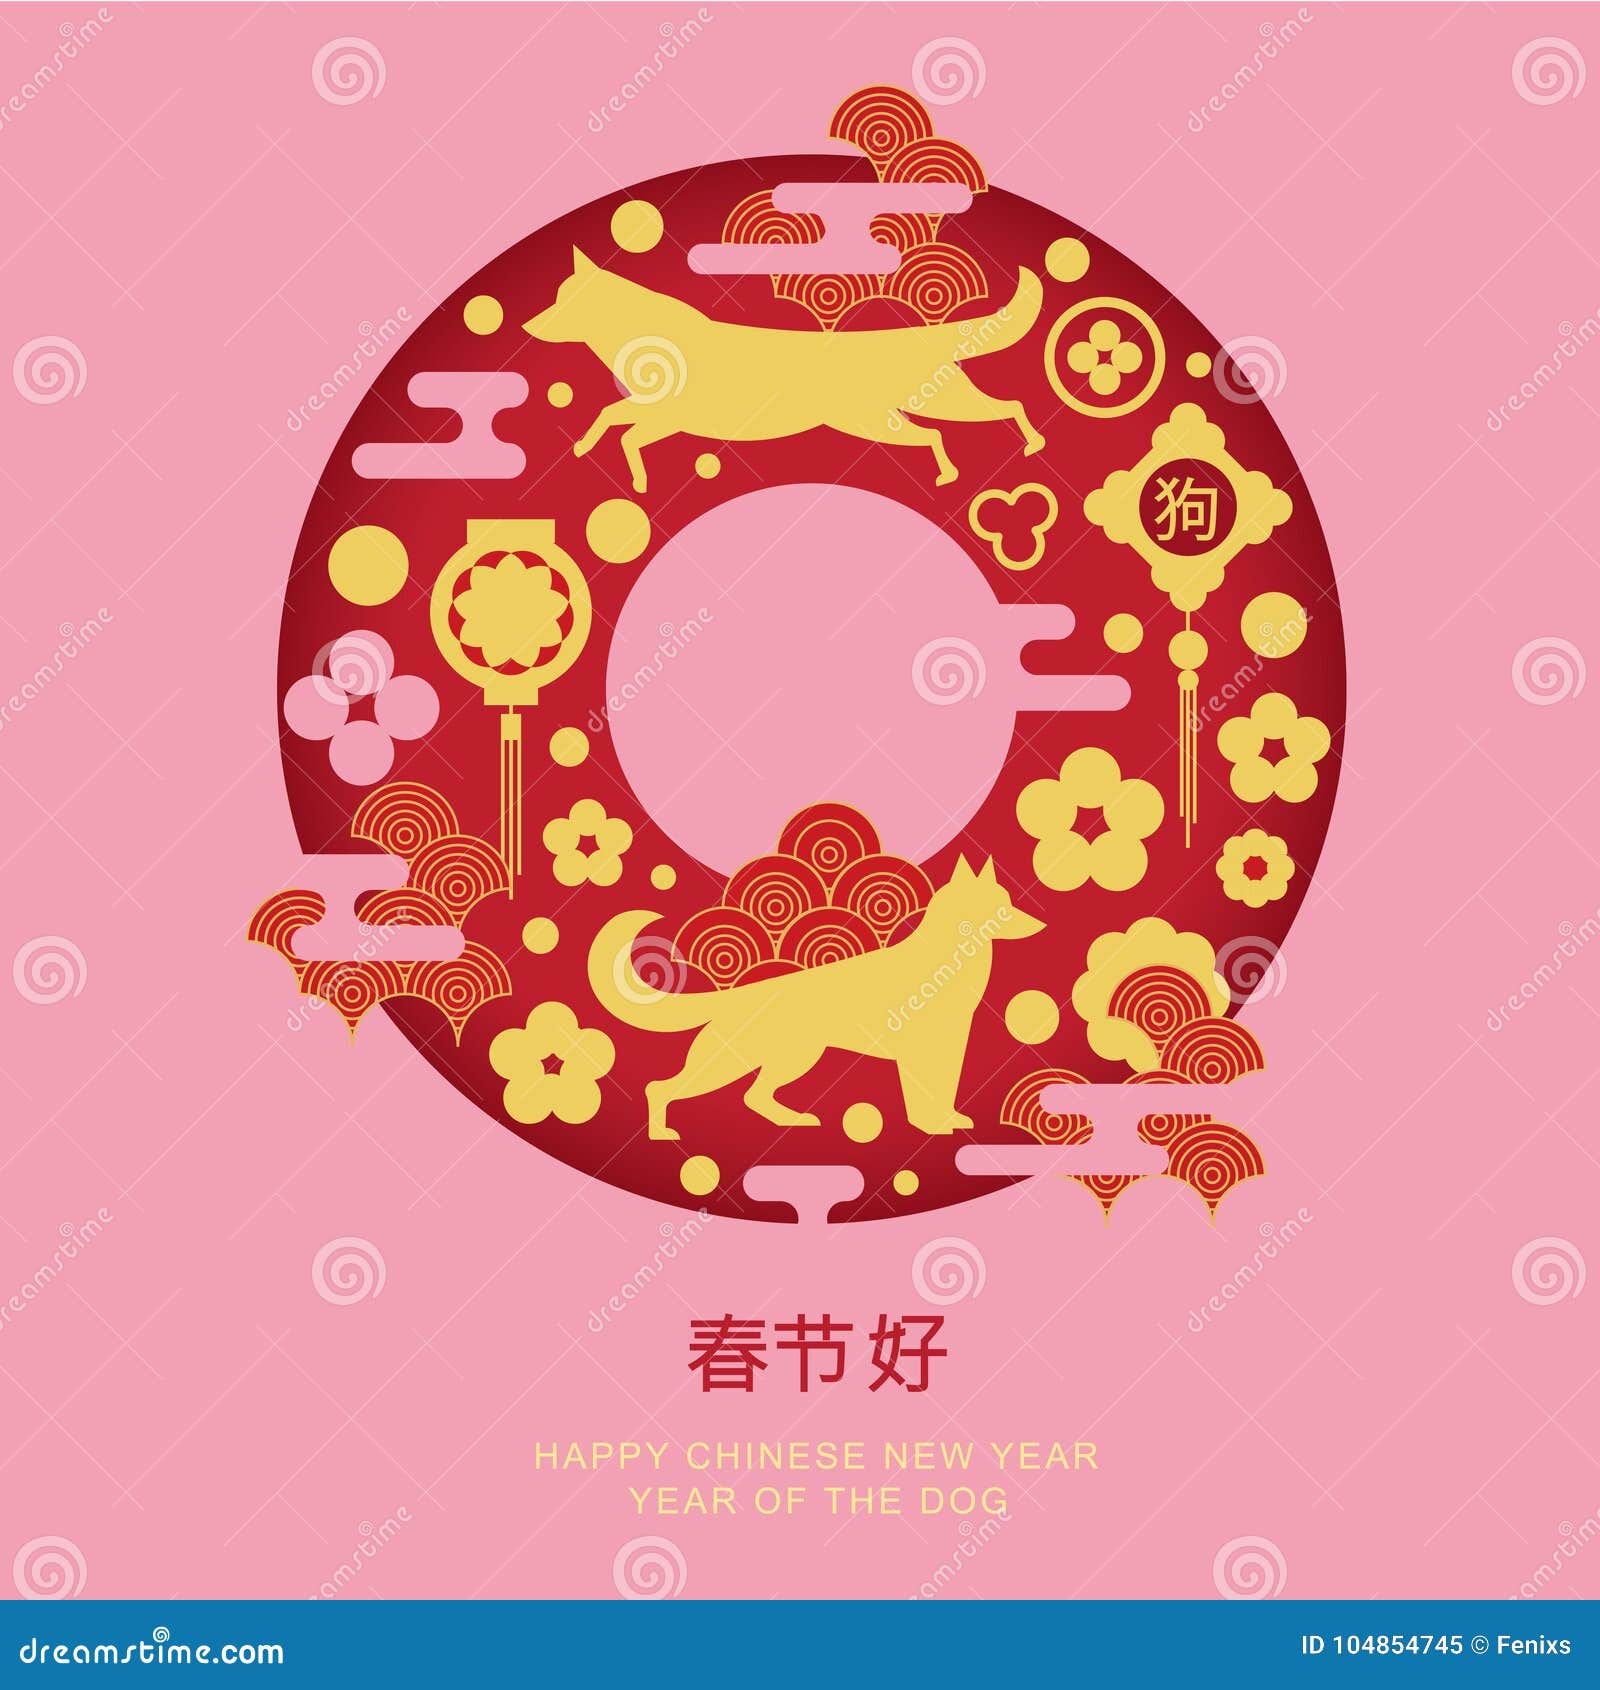 Chinese New Year 2018. Year of the Dog Stock Vector - Illustration of